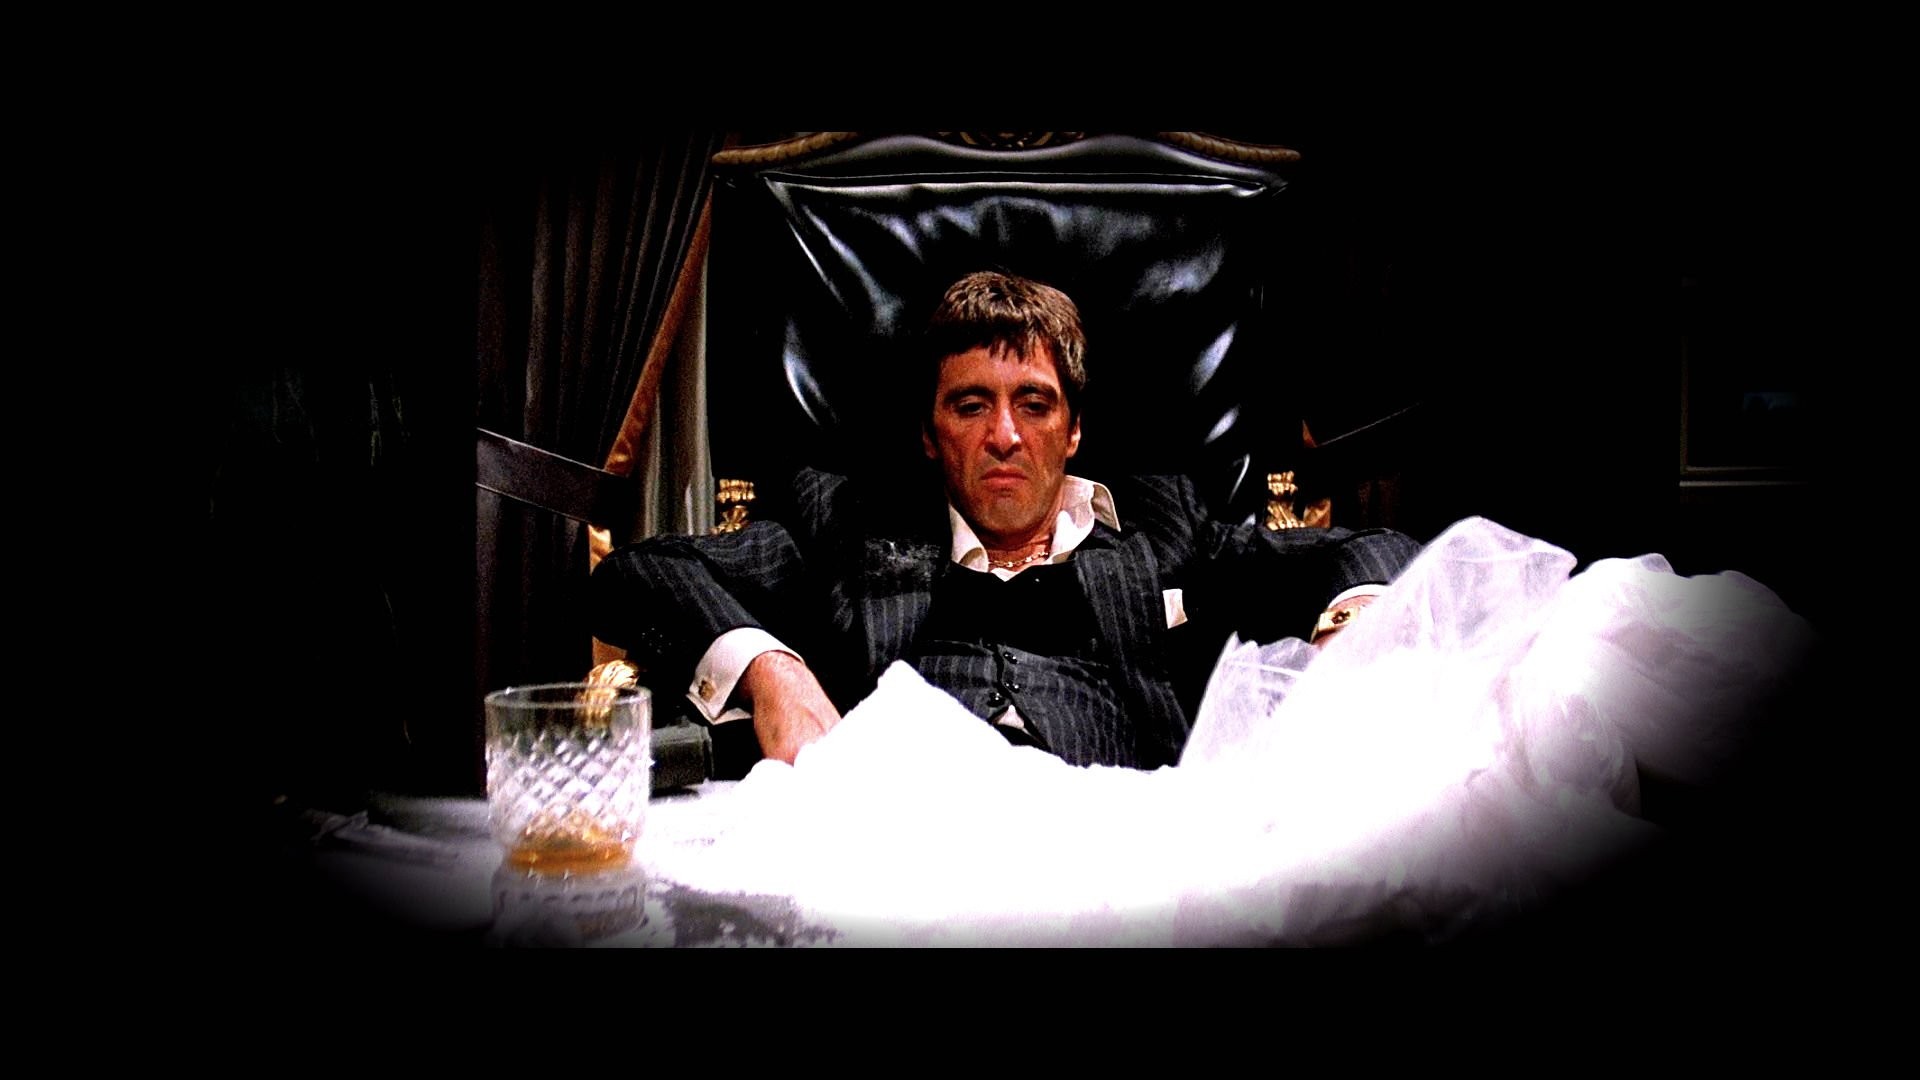 People 1920x1080 Scarface Tony Montana drugs Al Pacino movies men actor film stills black background gangster crime